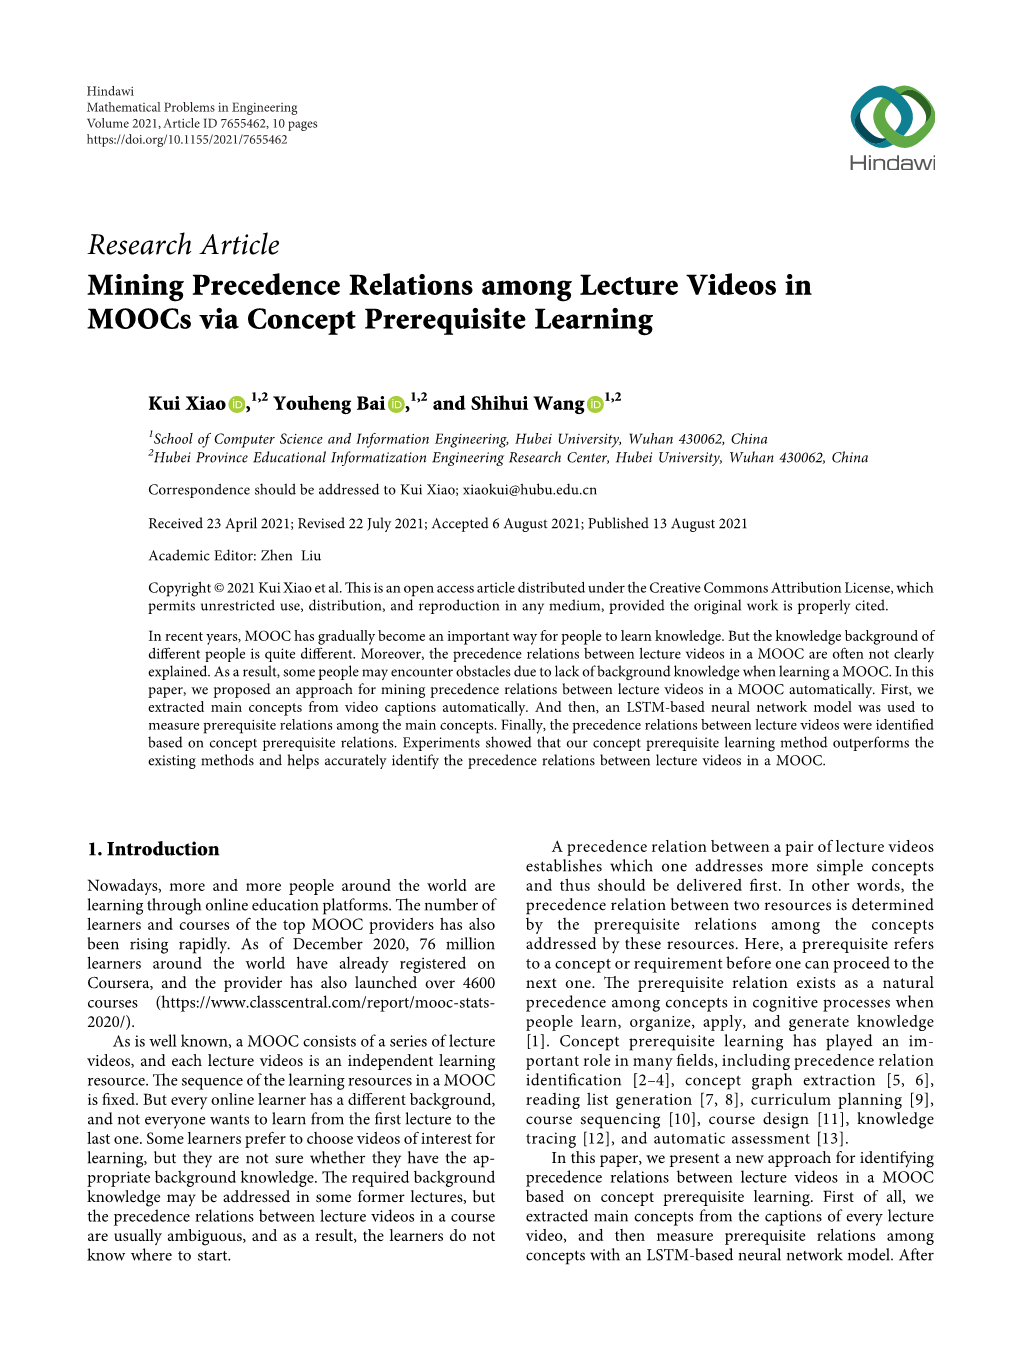 Research Article Mining Precedence Relations Among Lecture Videos in Moocs Via Concept Prerequisite Learning